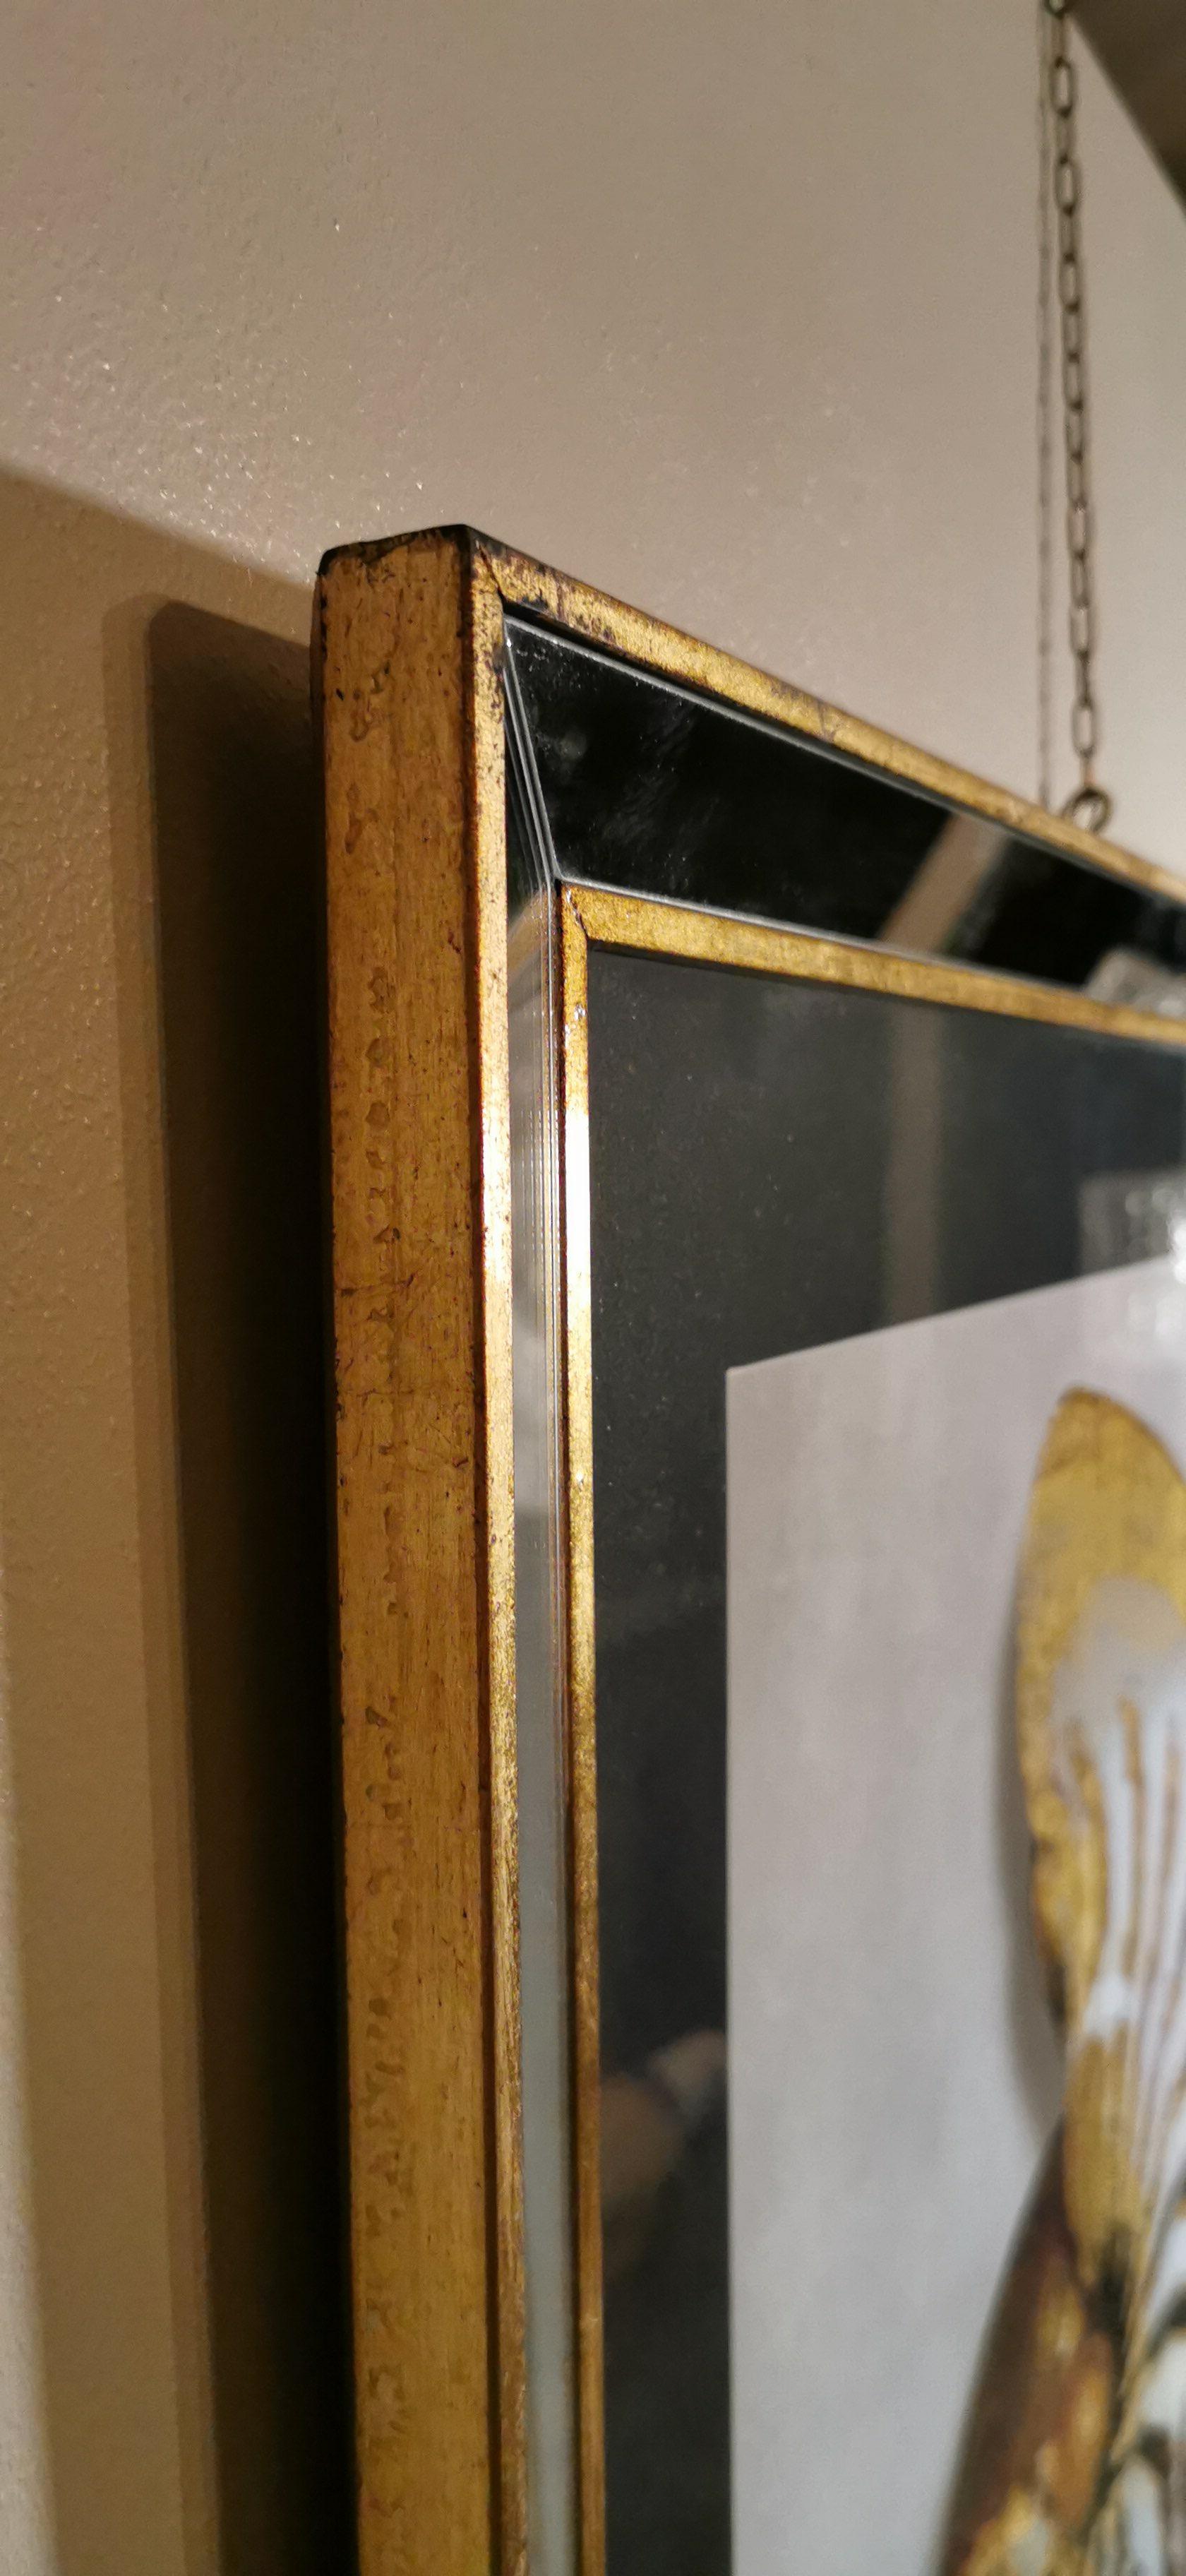 Contemporary Italian Golden Shell Print, Gilded Wood Frame with Mirror '2 of 4' For Sale 1